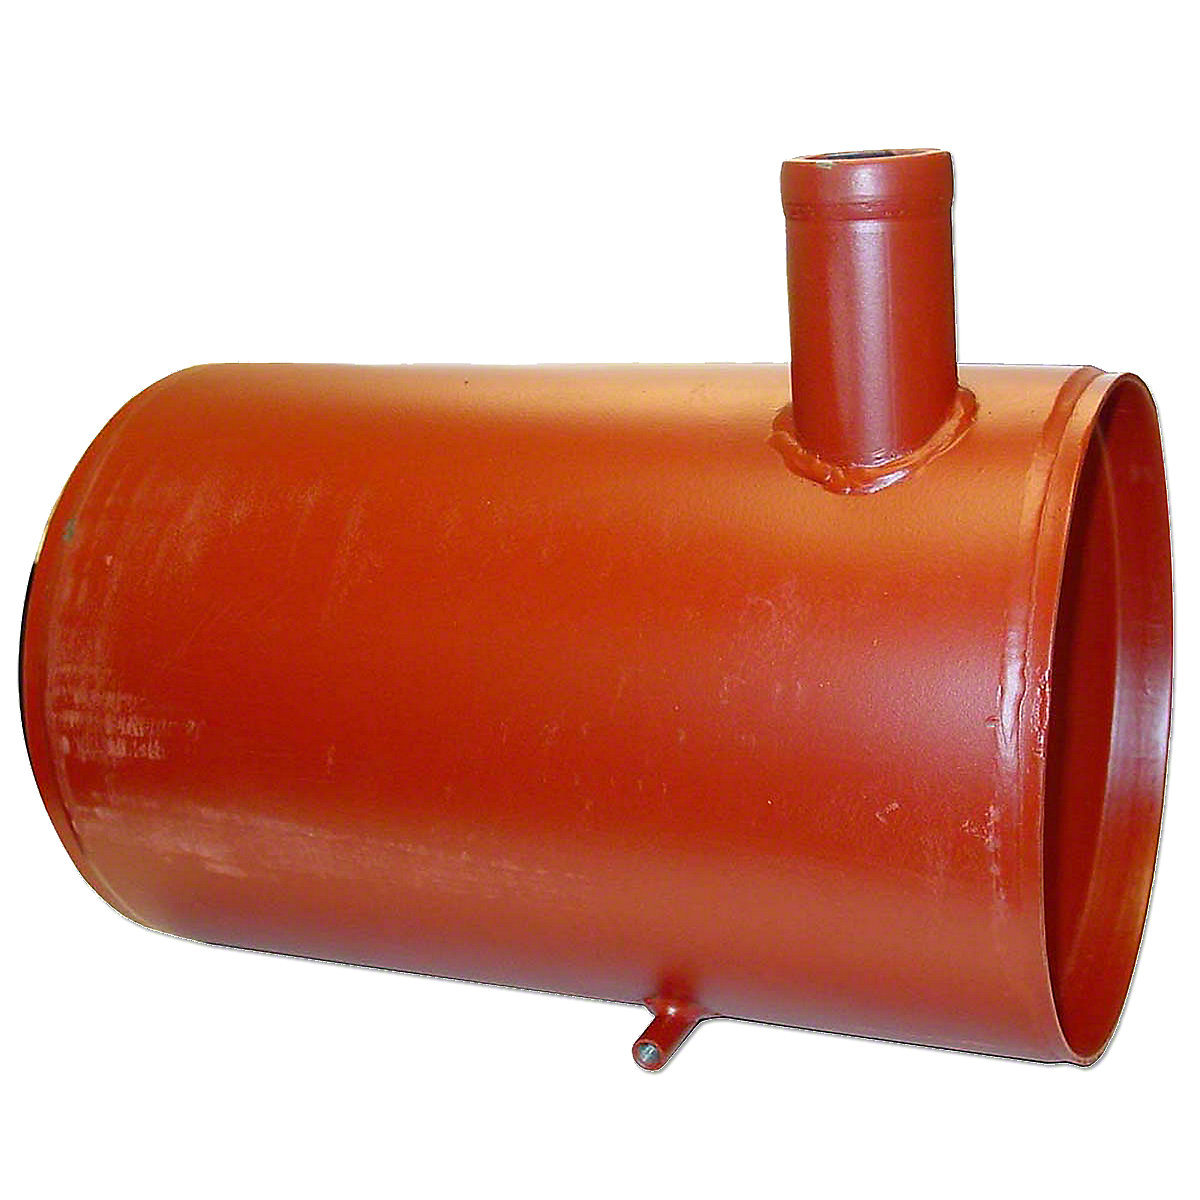 Fuel Tank For Allis Chalmers: G.